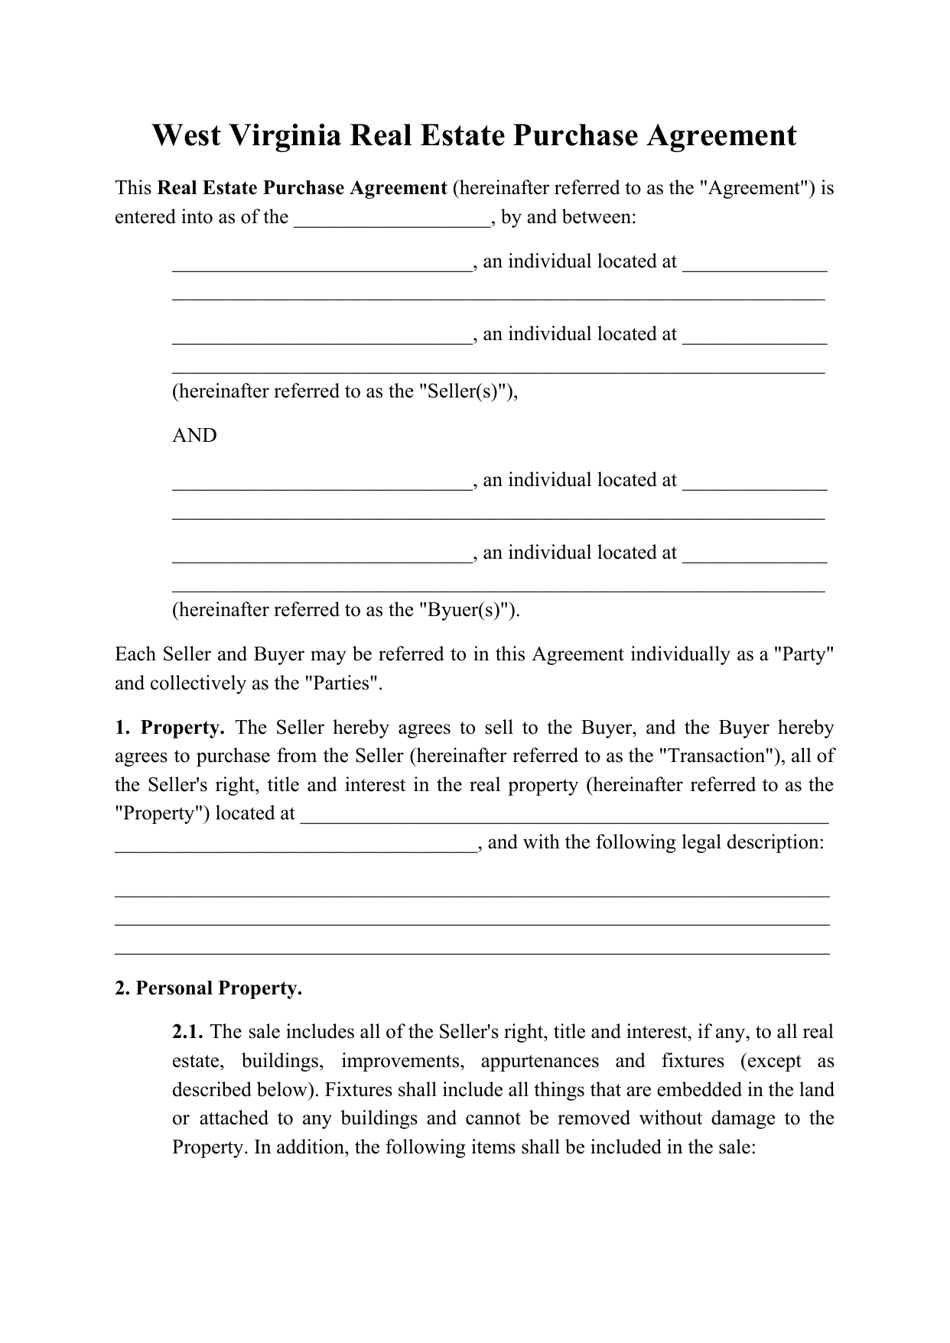 west-virginia-real-estate-purchase-agreement-template-download